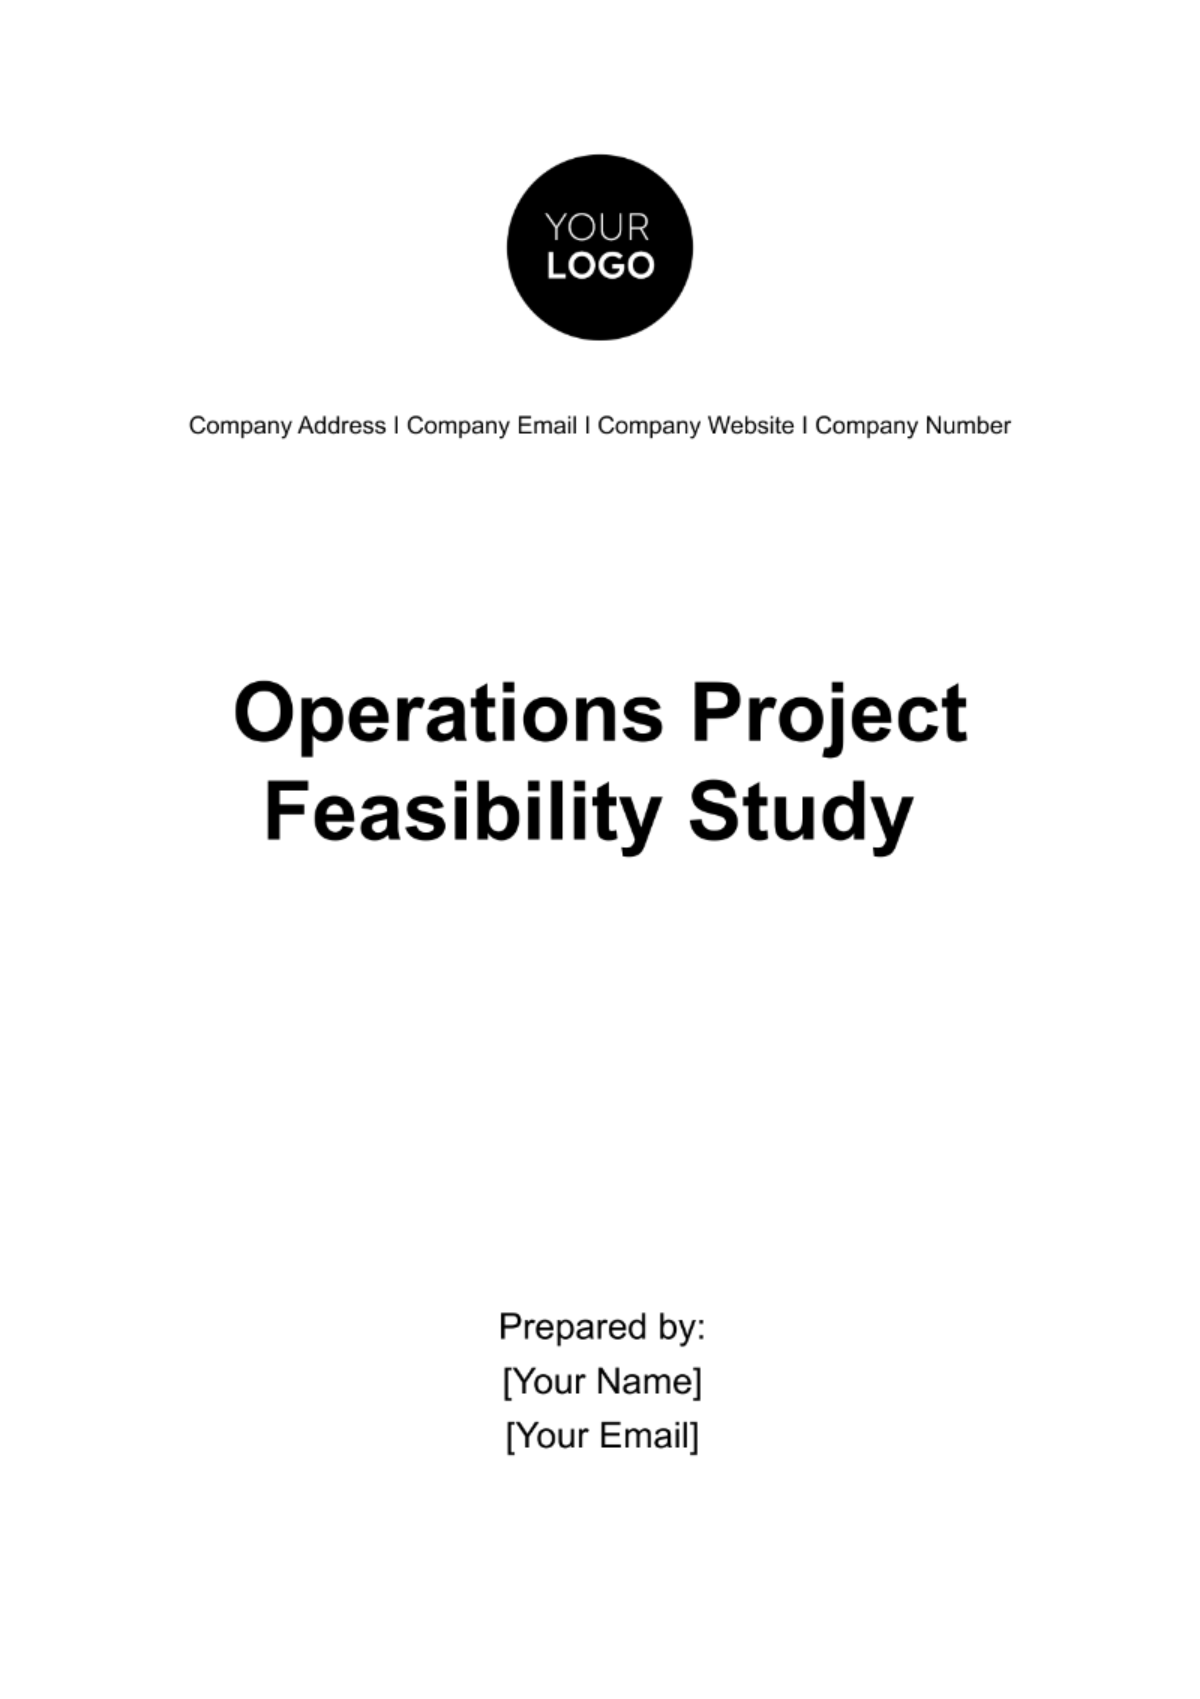 Operations Project Feasibility Study Template